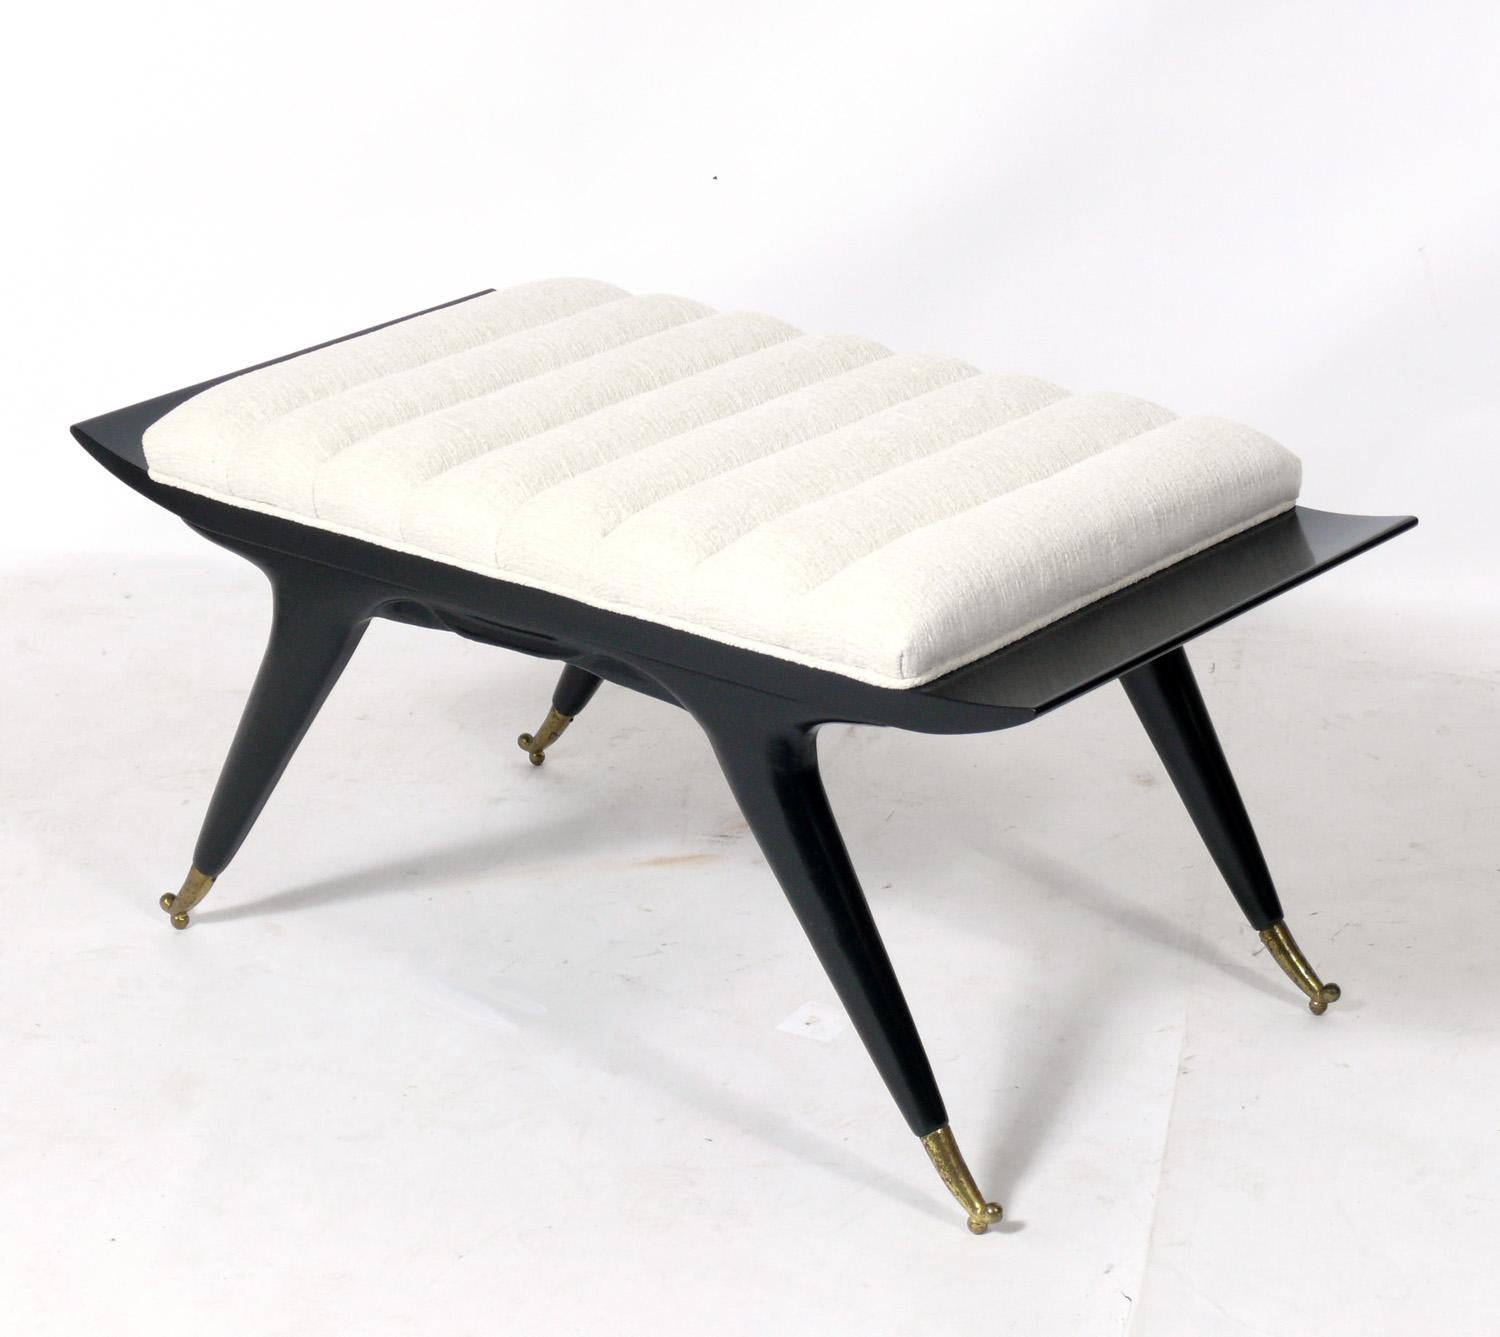 Pair of Italian mid century benches or stools, Italy, circa 1950s. They have recently been refinished in black lacquer and plush ivory color channeled upholstery. Brass sabots retain warm original patina.